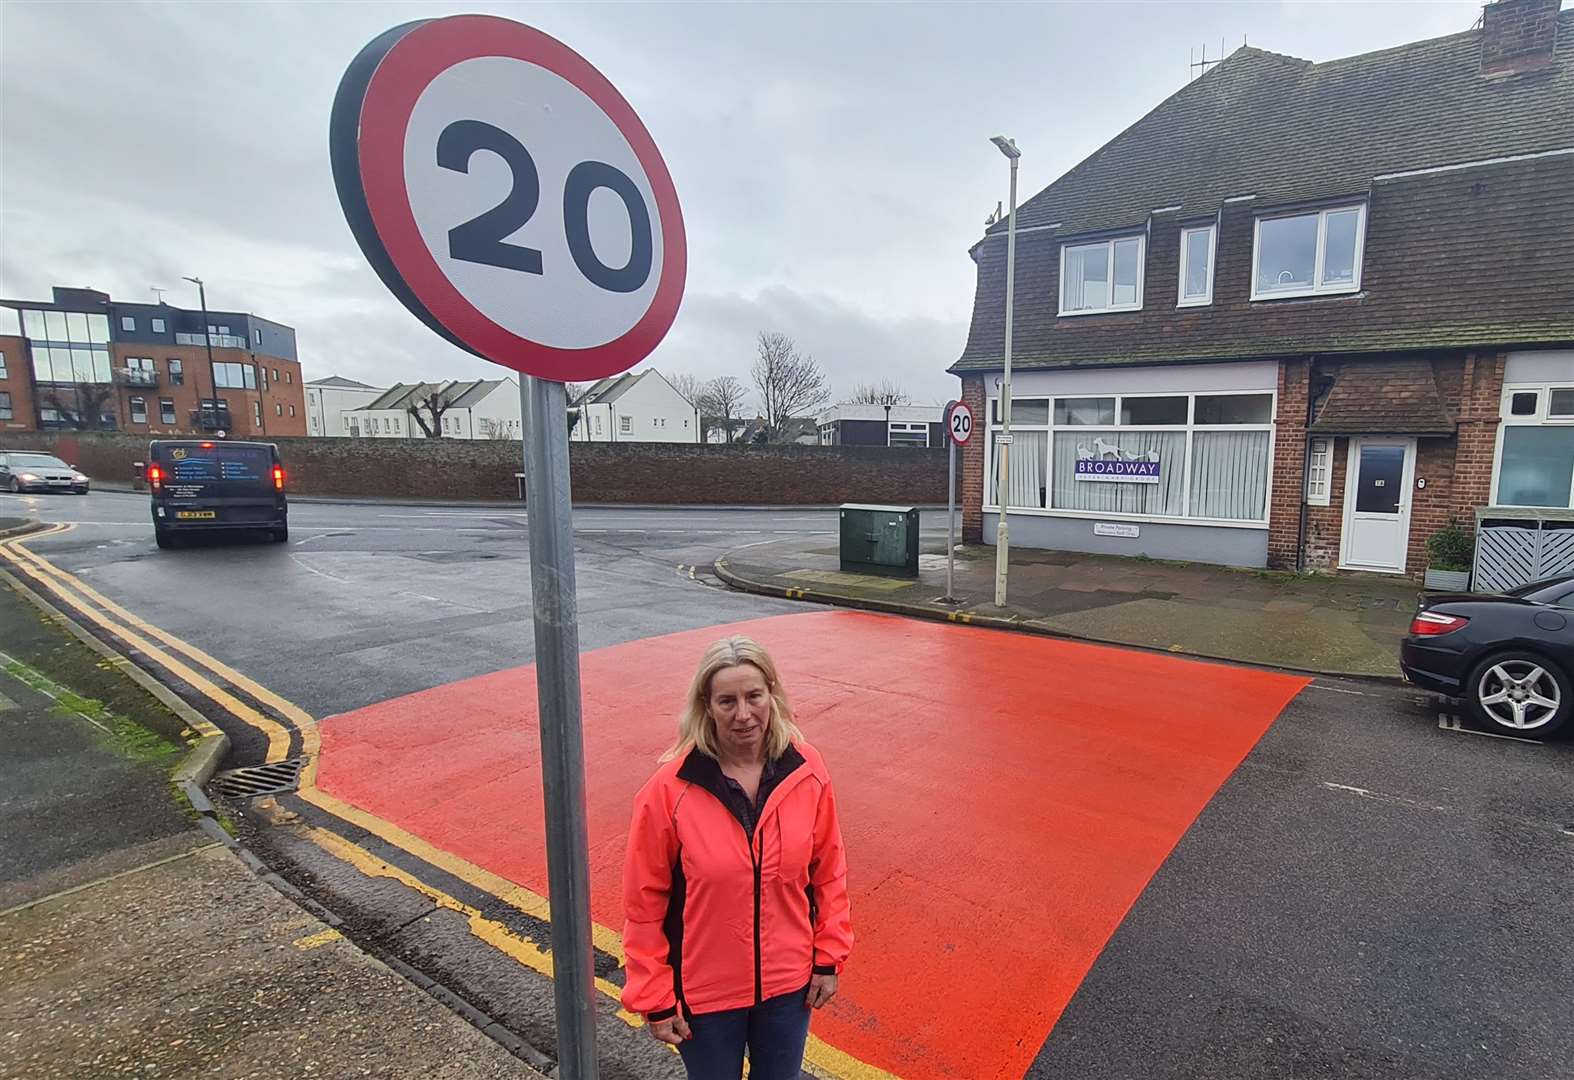 Sue Perry believes the 20mph warning road paint in Herne Bay is ‘hideous’